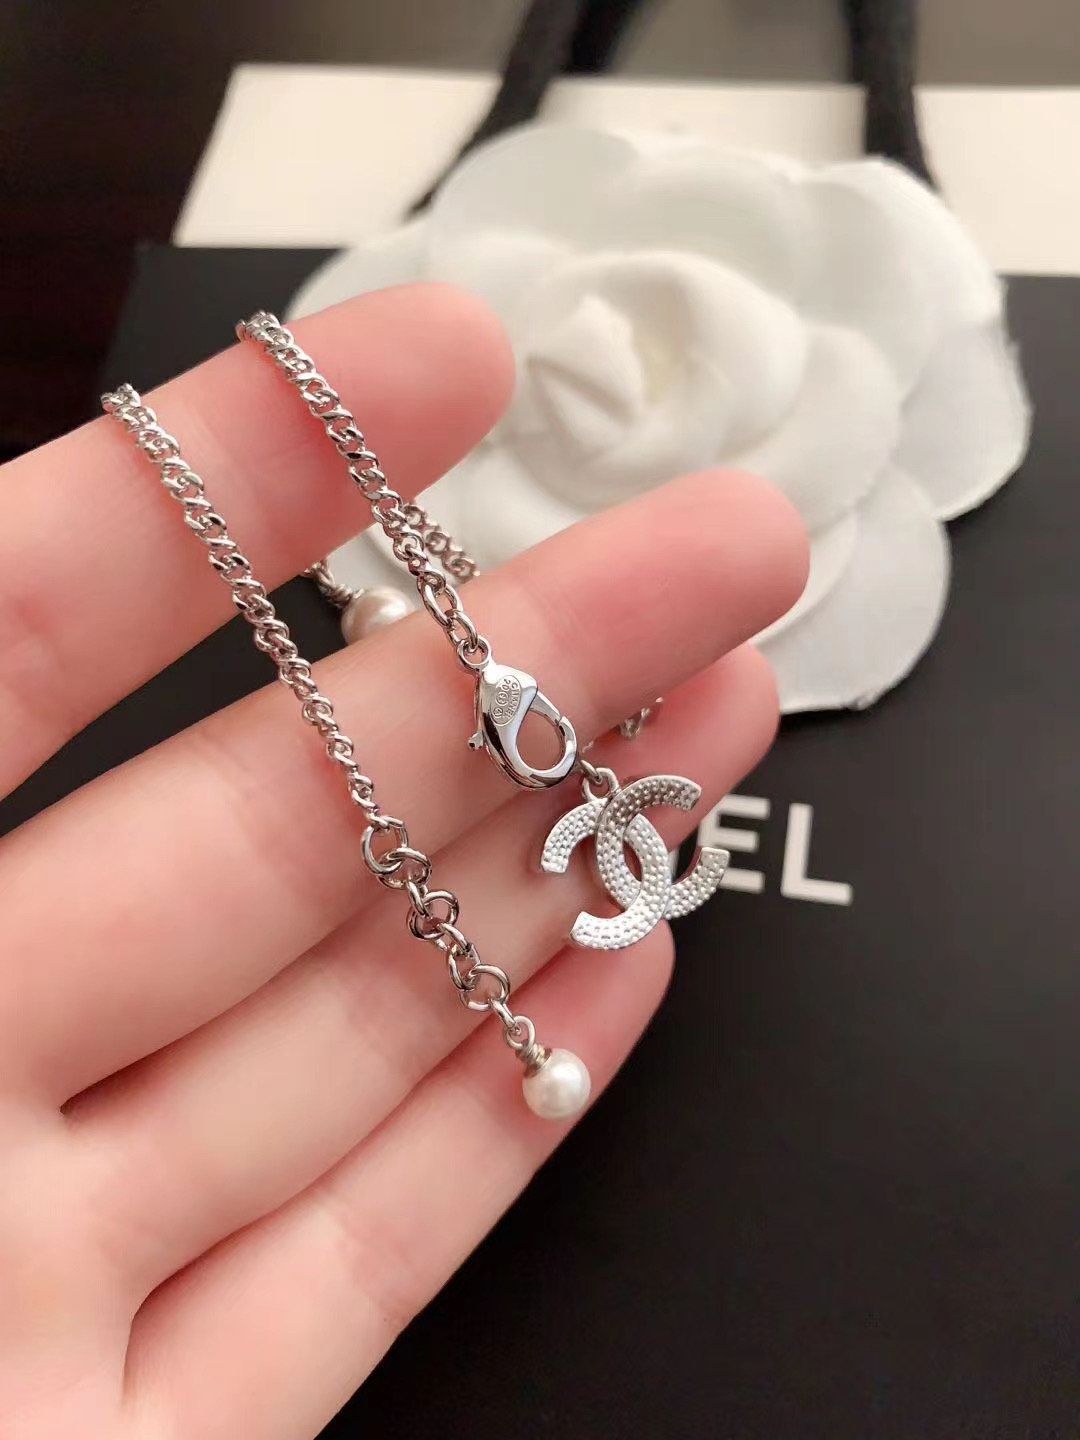 B169 Chanel necklace